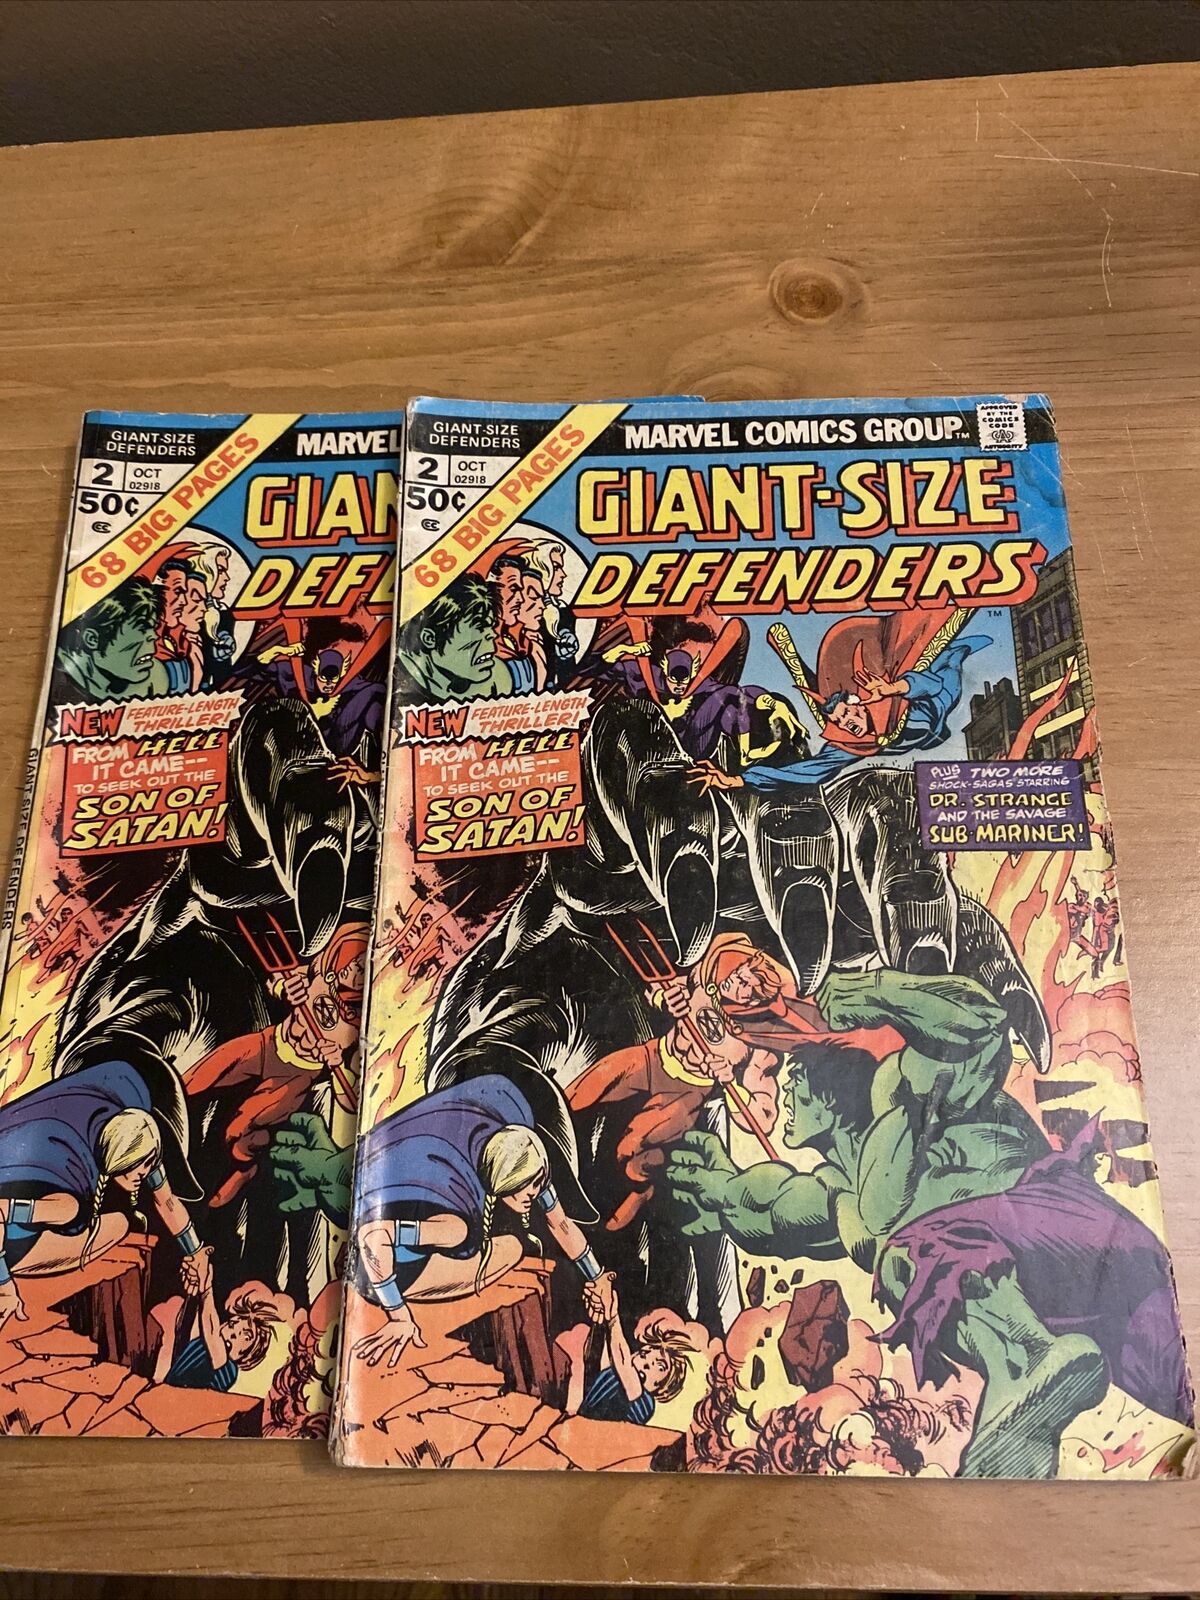 Two Giant-Size Defenders #2 Marvel Comics 1974.